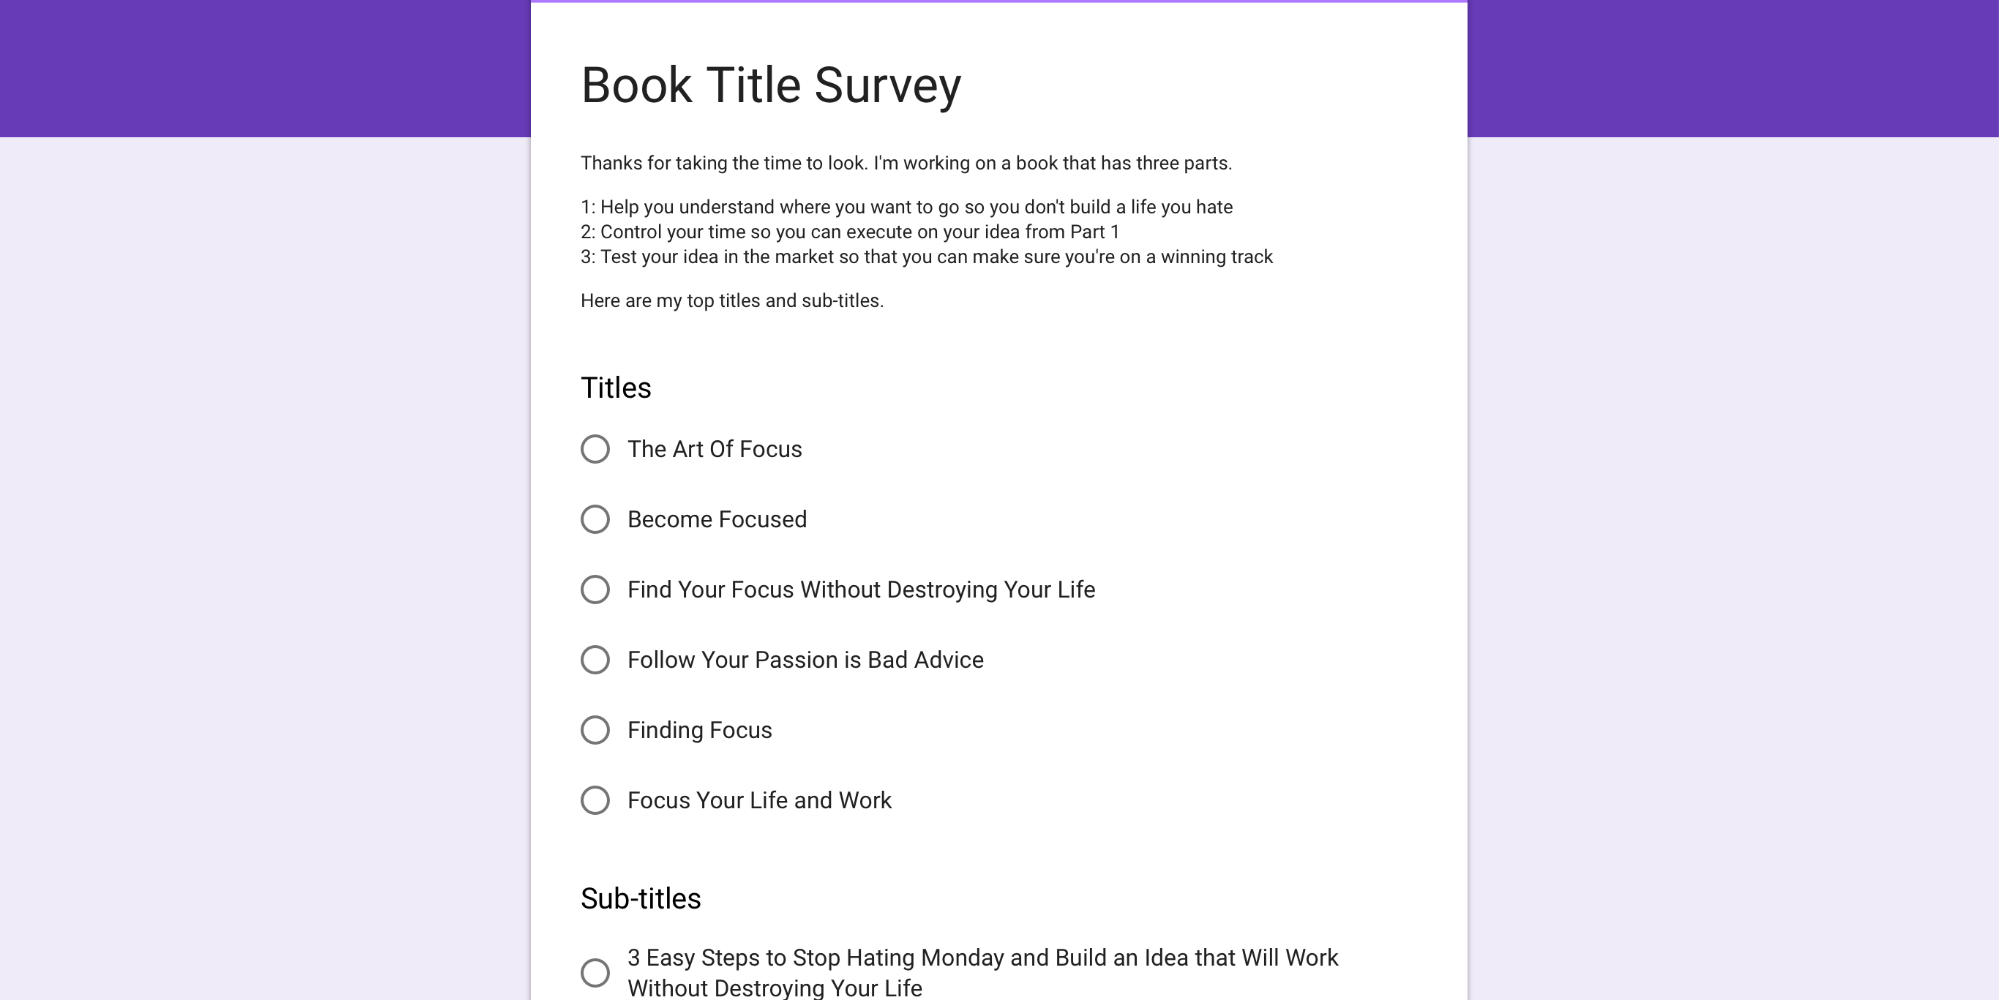 The survey I sent to readers about book titles and subtitles